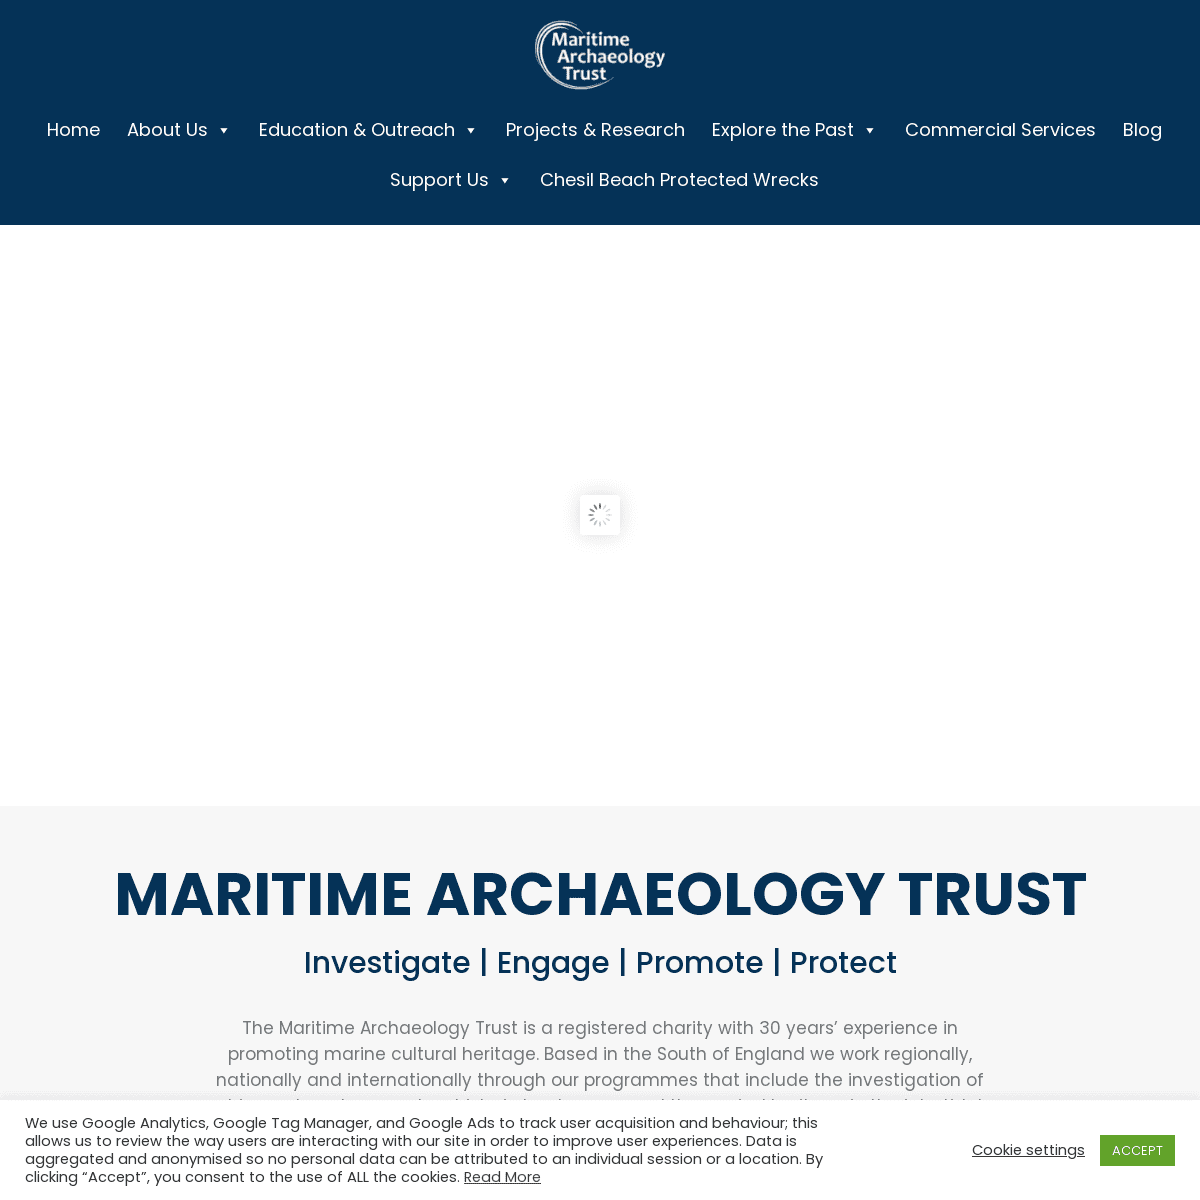 A complete backup of https://maritimearchaeologytrust.org